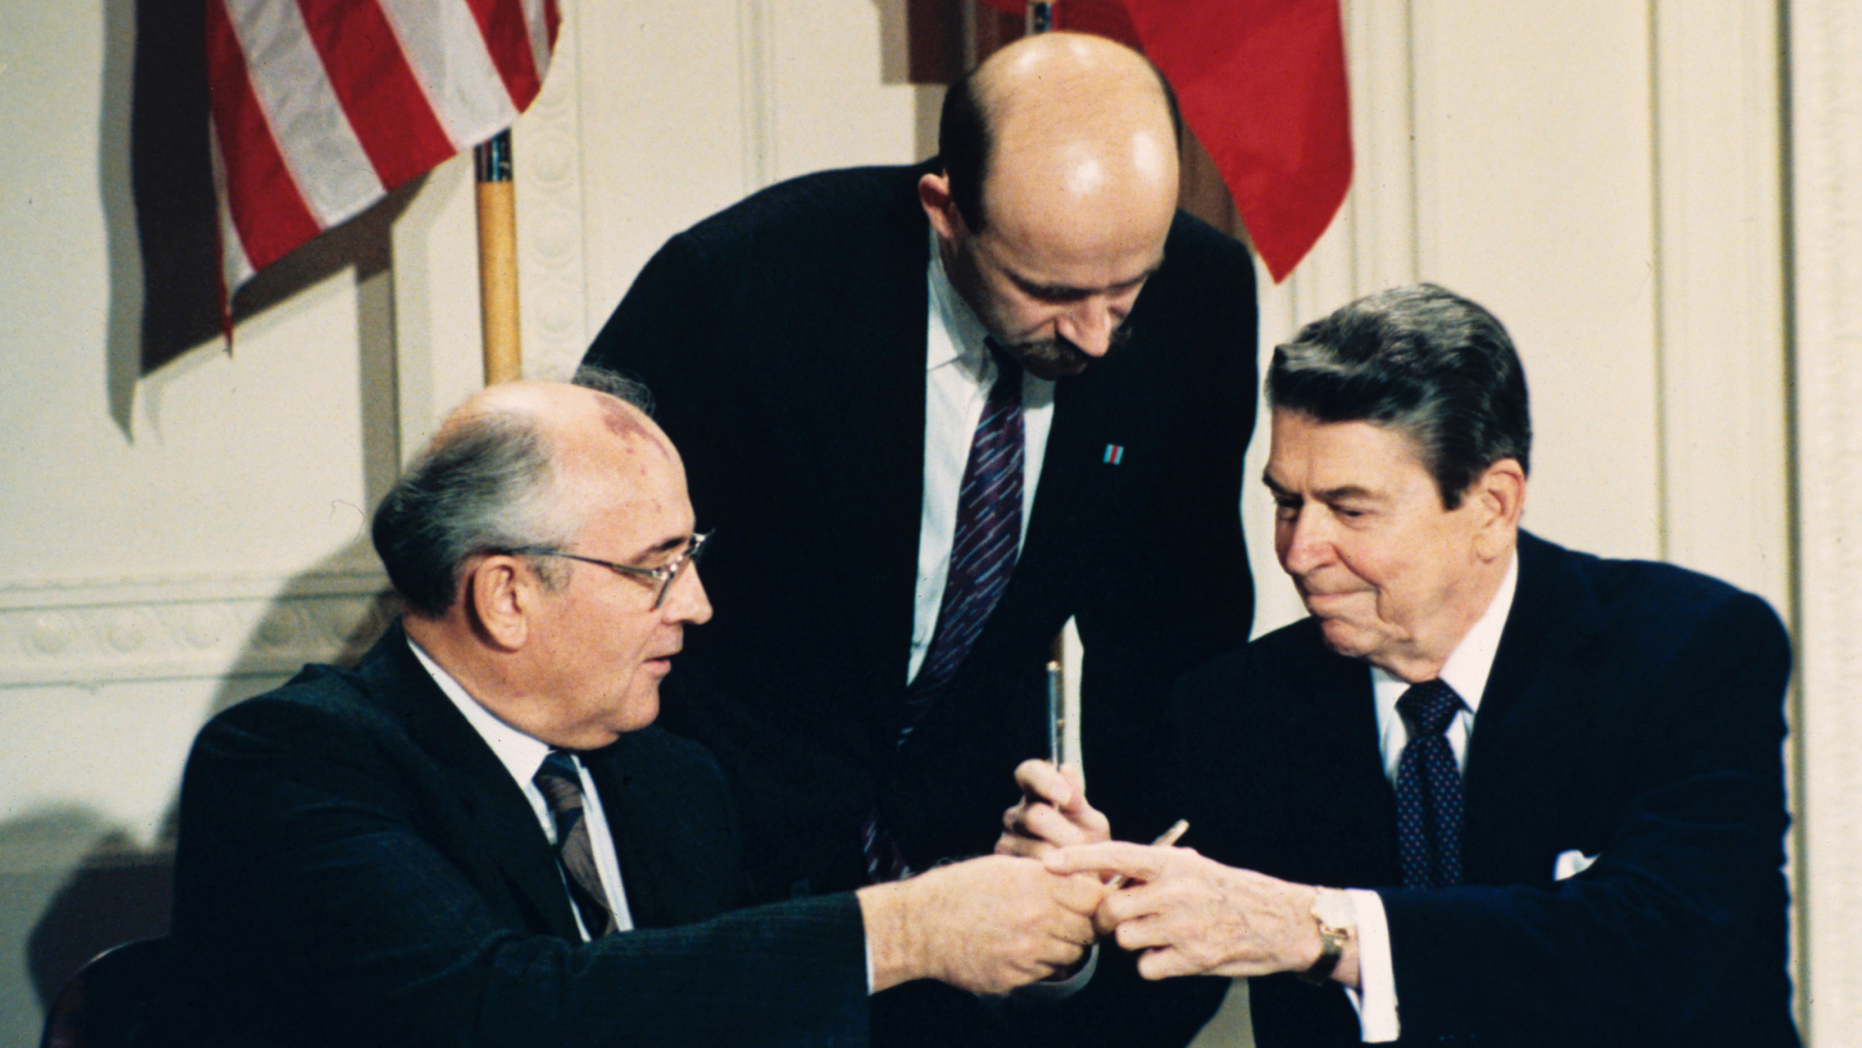 FILE - In this Dec. 8, 1987 file photo U.S. President Ronald Reagan, right, and Soviet leader Mikhail Gorbachev exchange pens during the Intermediate Range Nuclear Forces Treaty signing ceremony in the White House East Room in Washington, D.C. Gorbachev's translator Pavel Palazhchenko stands in the middle. Trump's announcement that the United States would leave the Intermediate-Range Nuclear Forces, or INF, treaty brought sharp criticism on Sunday Oct. 21, 2018, from Russian officials and from former Soviet President Mikhail Gorbachev, who signed the treaty in 1987 with President Ronald Reagan. (AP Photo/Bob Daugherty, File)